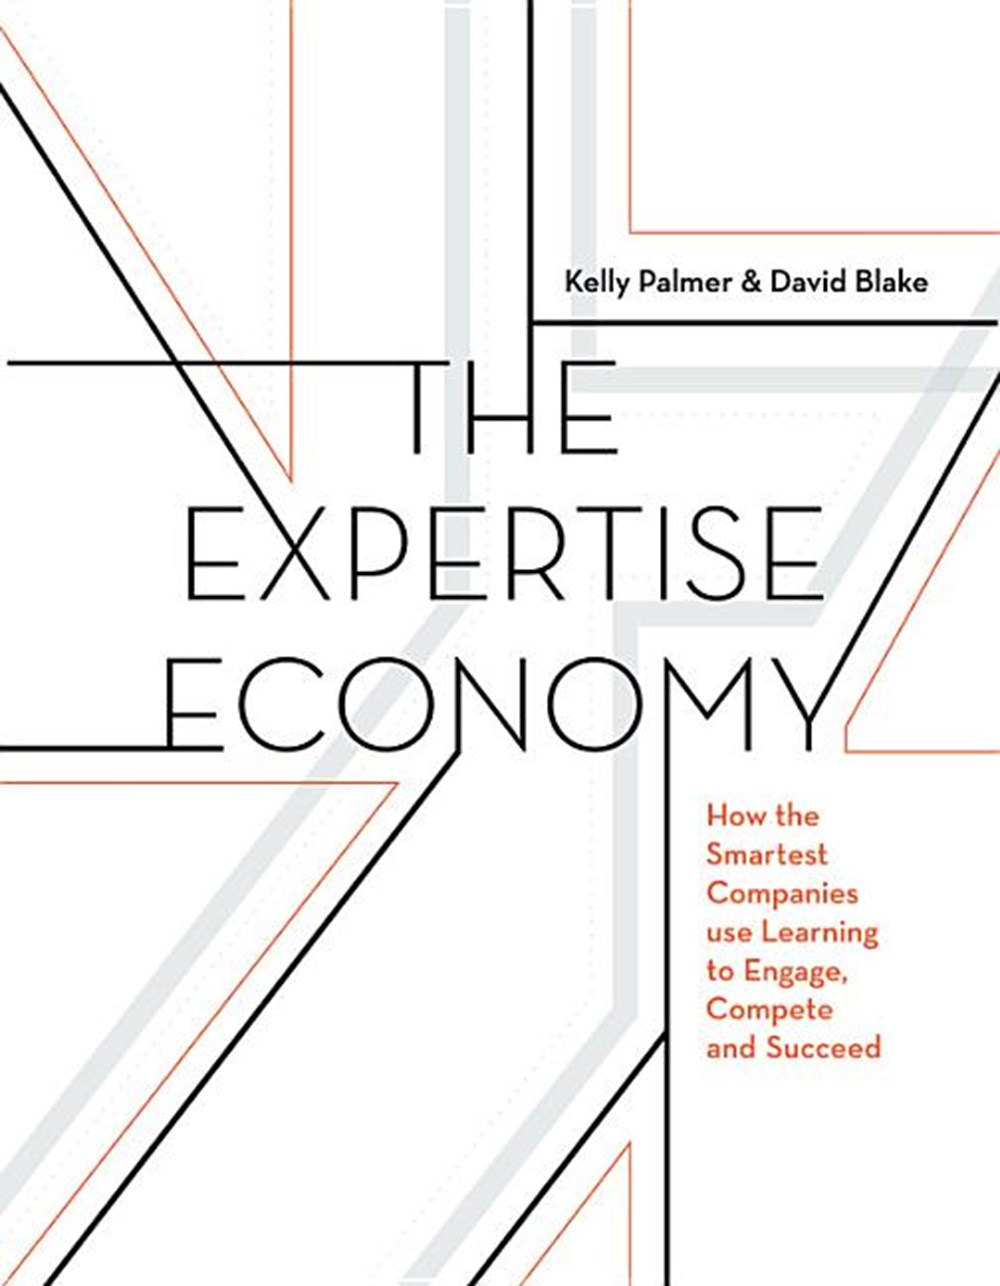 Expertise Economy: How the Smartest Companies Use Learning to Engage, Compete, and Succeed